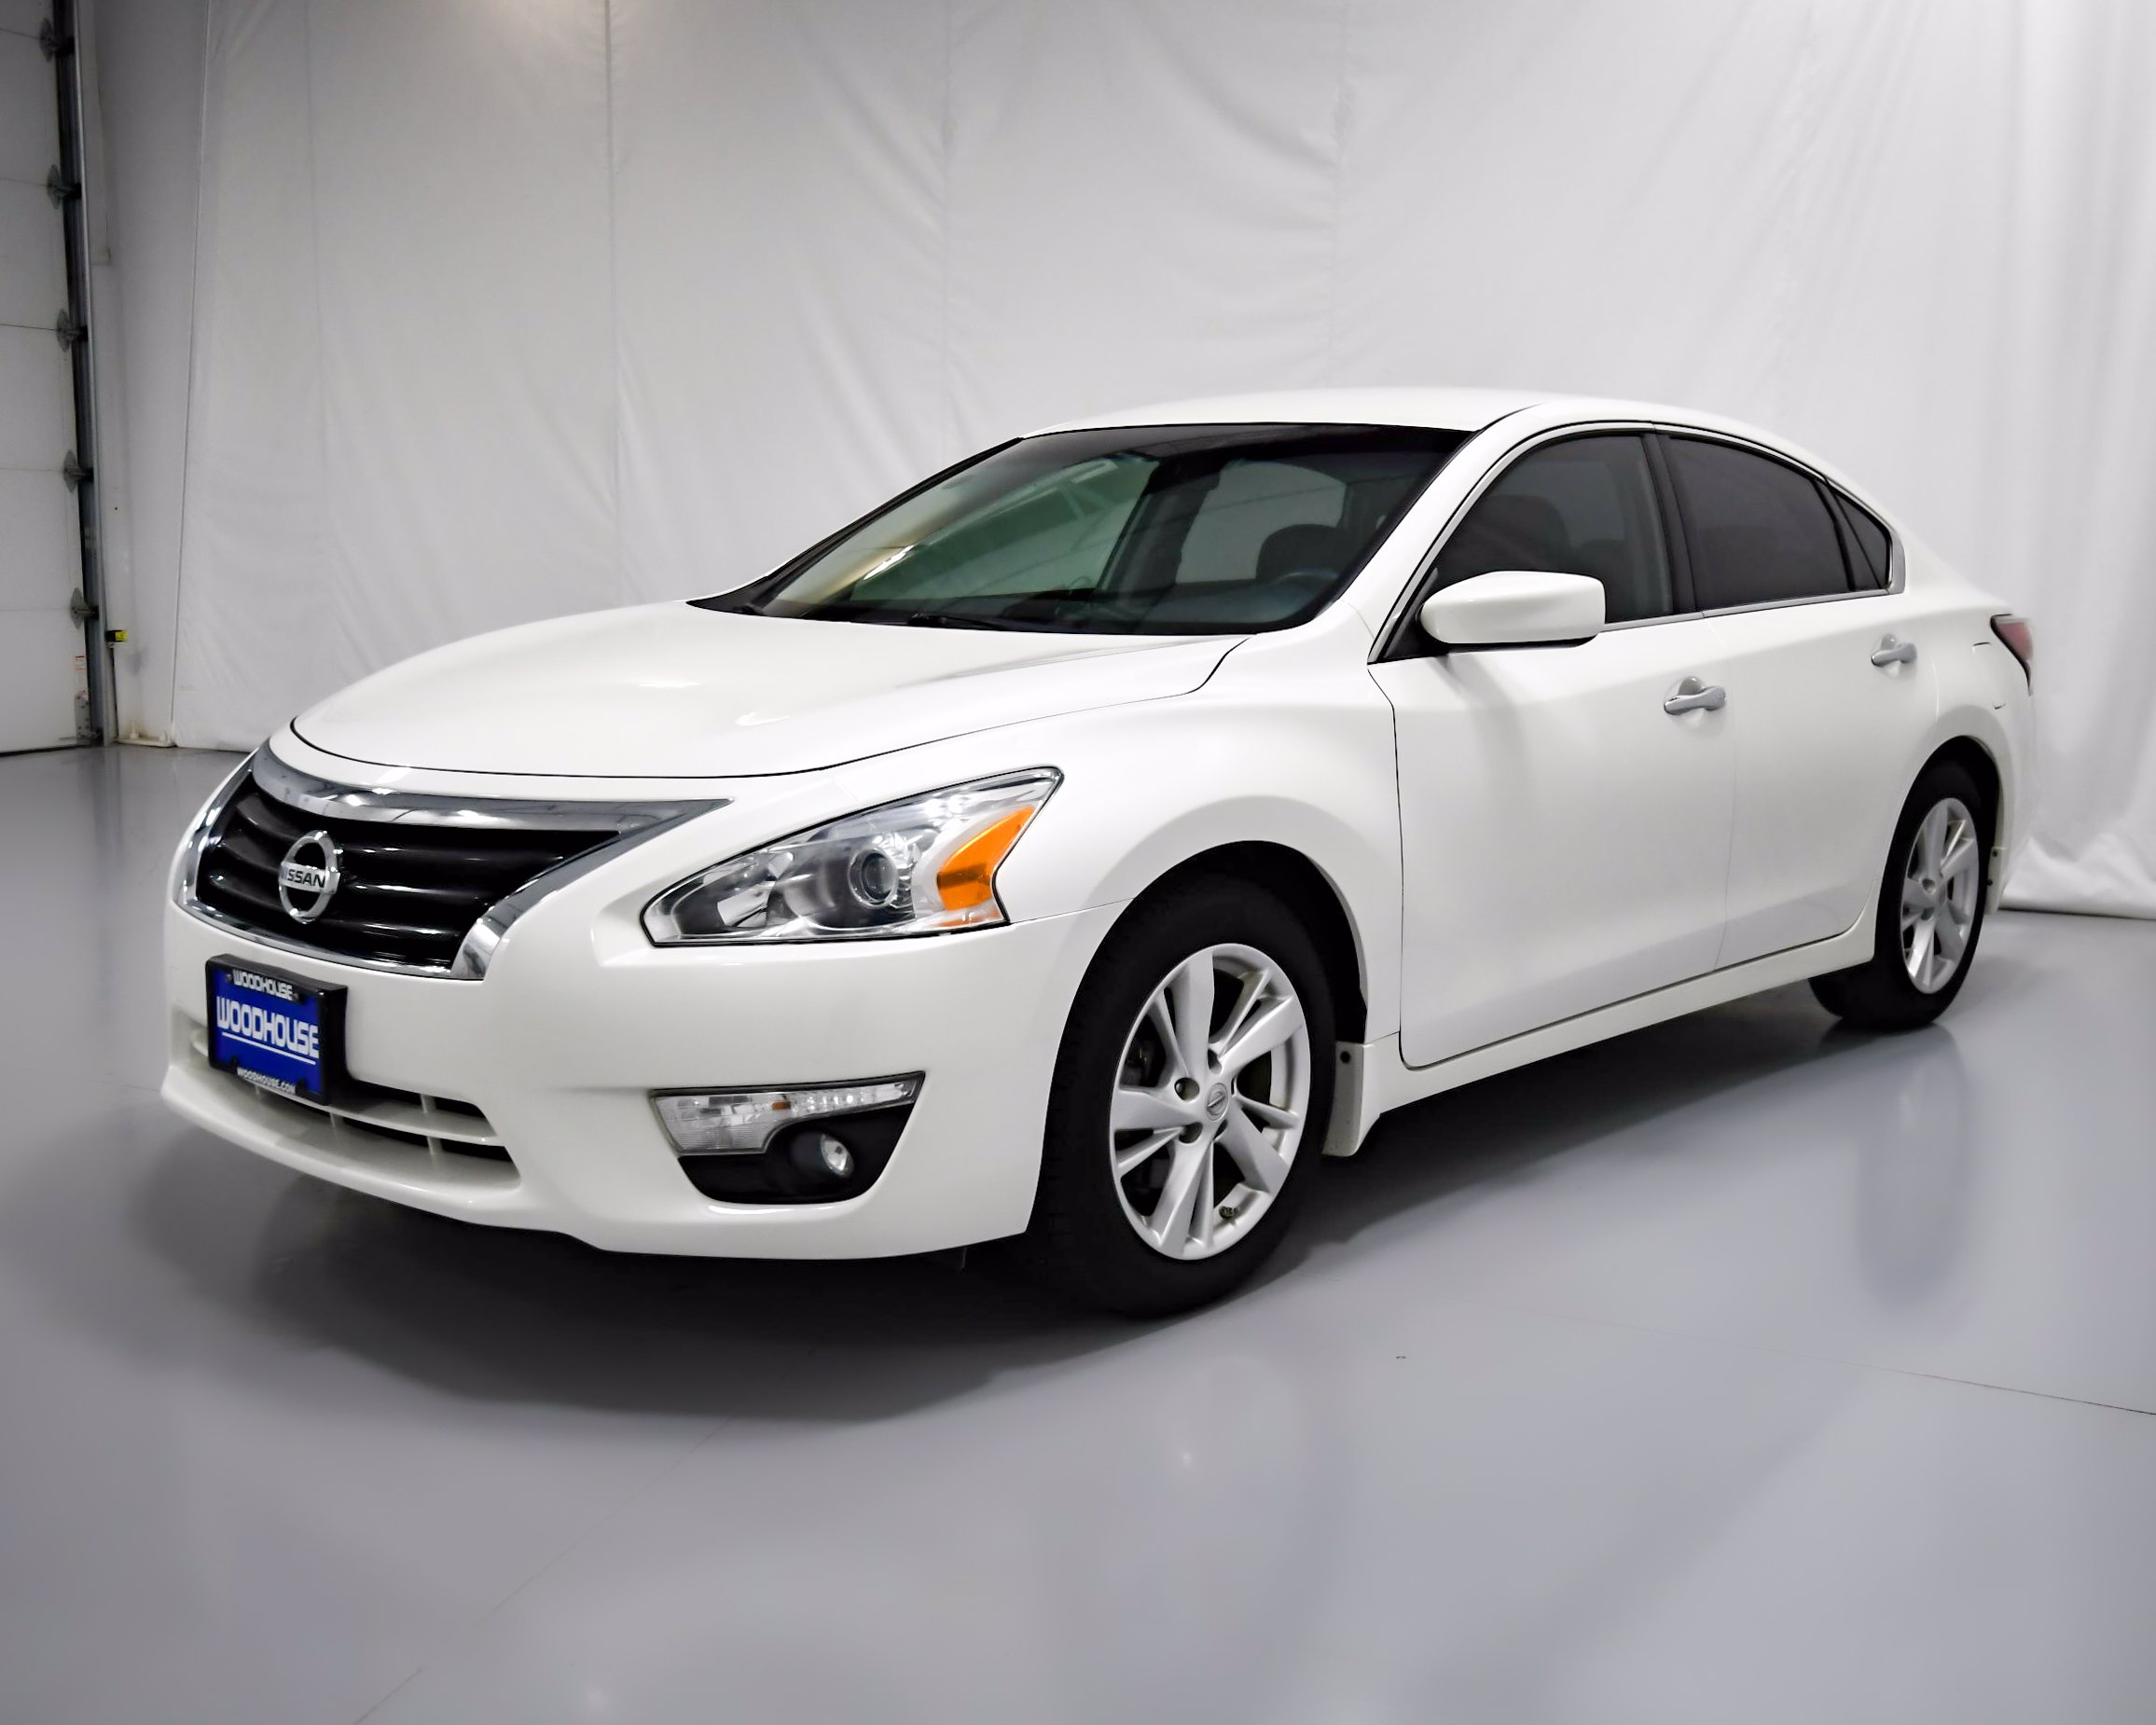 PreOwned 2015 Nissan Altima 2.5 SV FWD 4dr Car